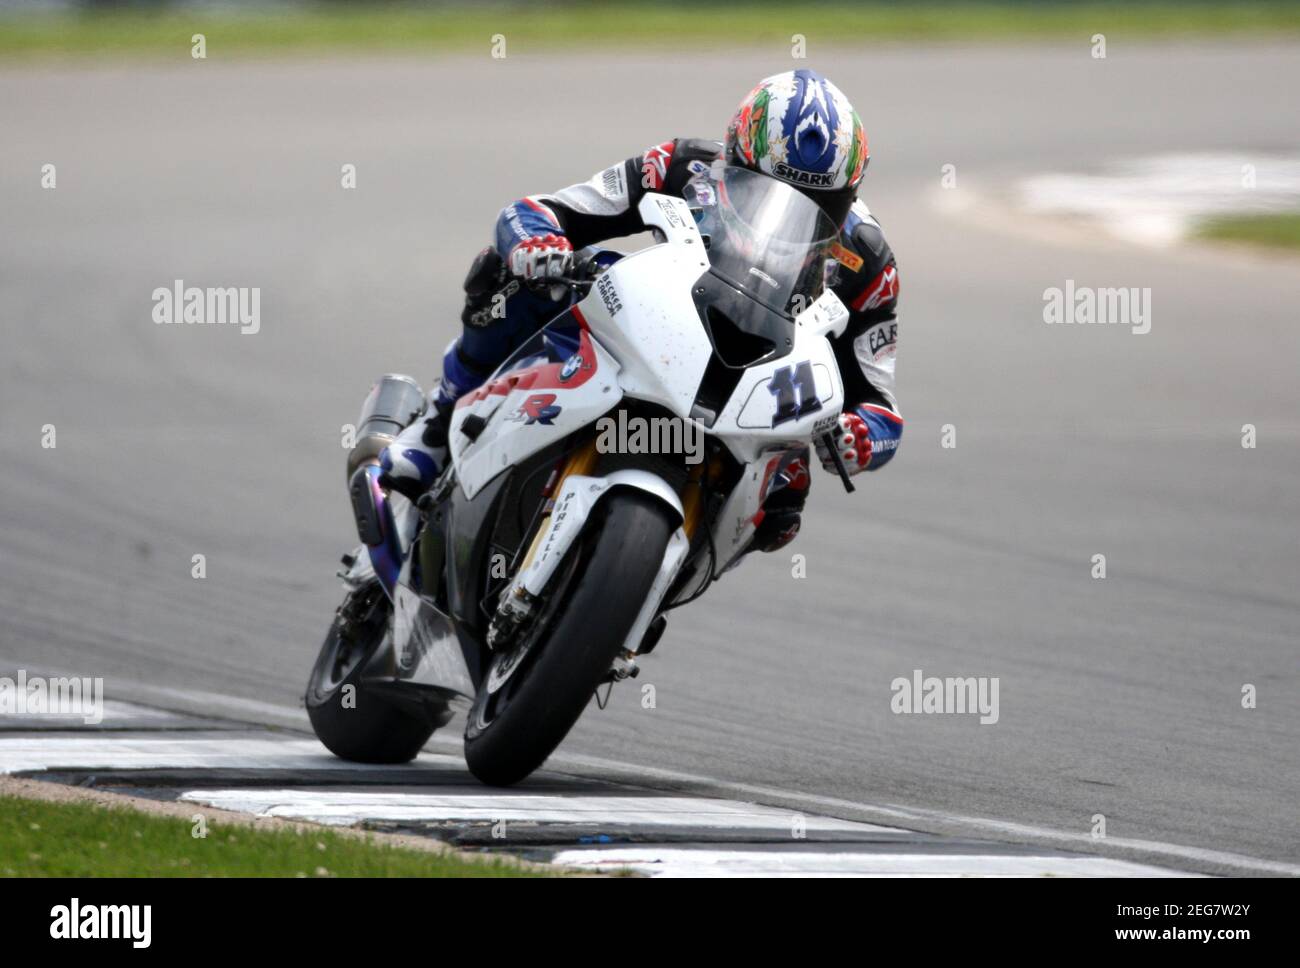 Bmw Motorrad Motorsport High Resolution Stock Photography And Images Alamy